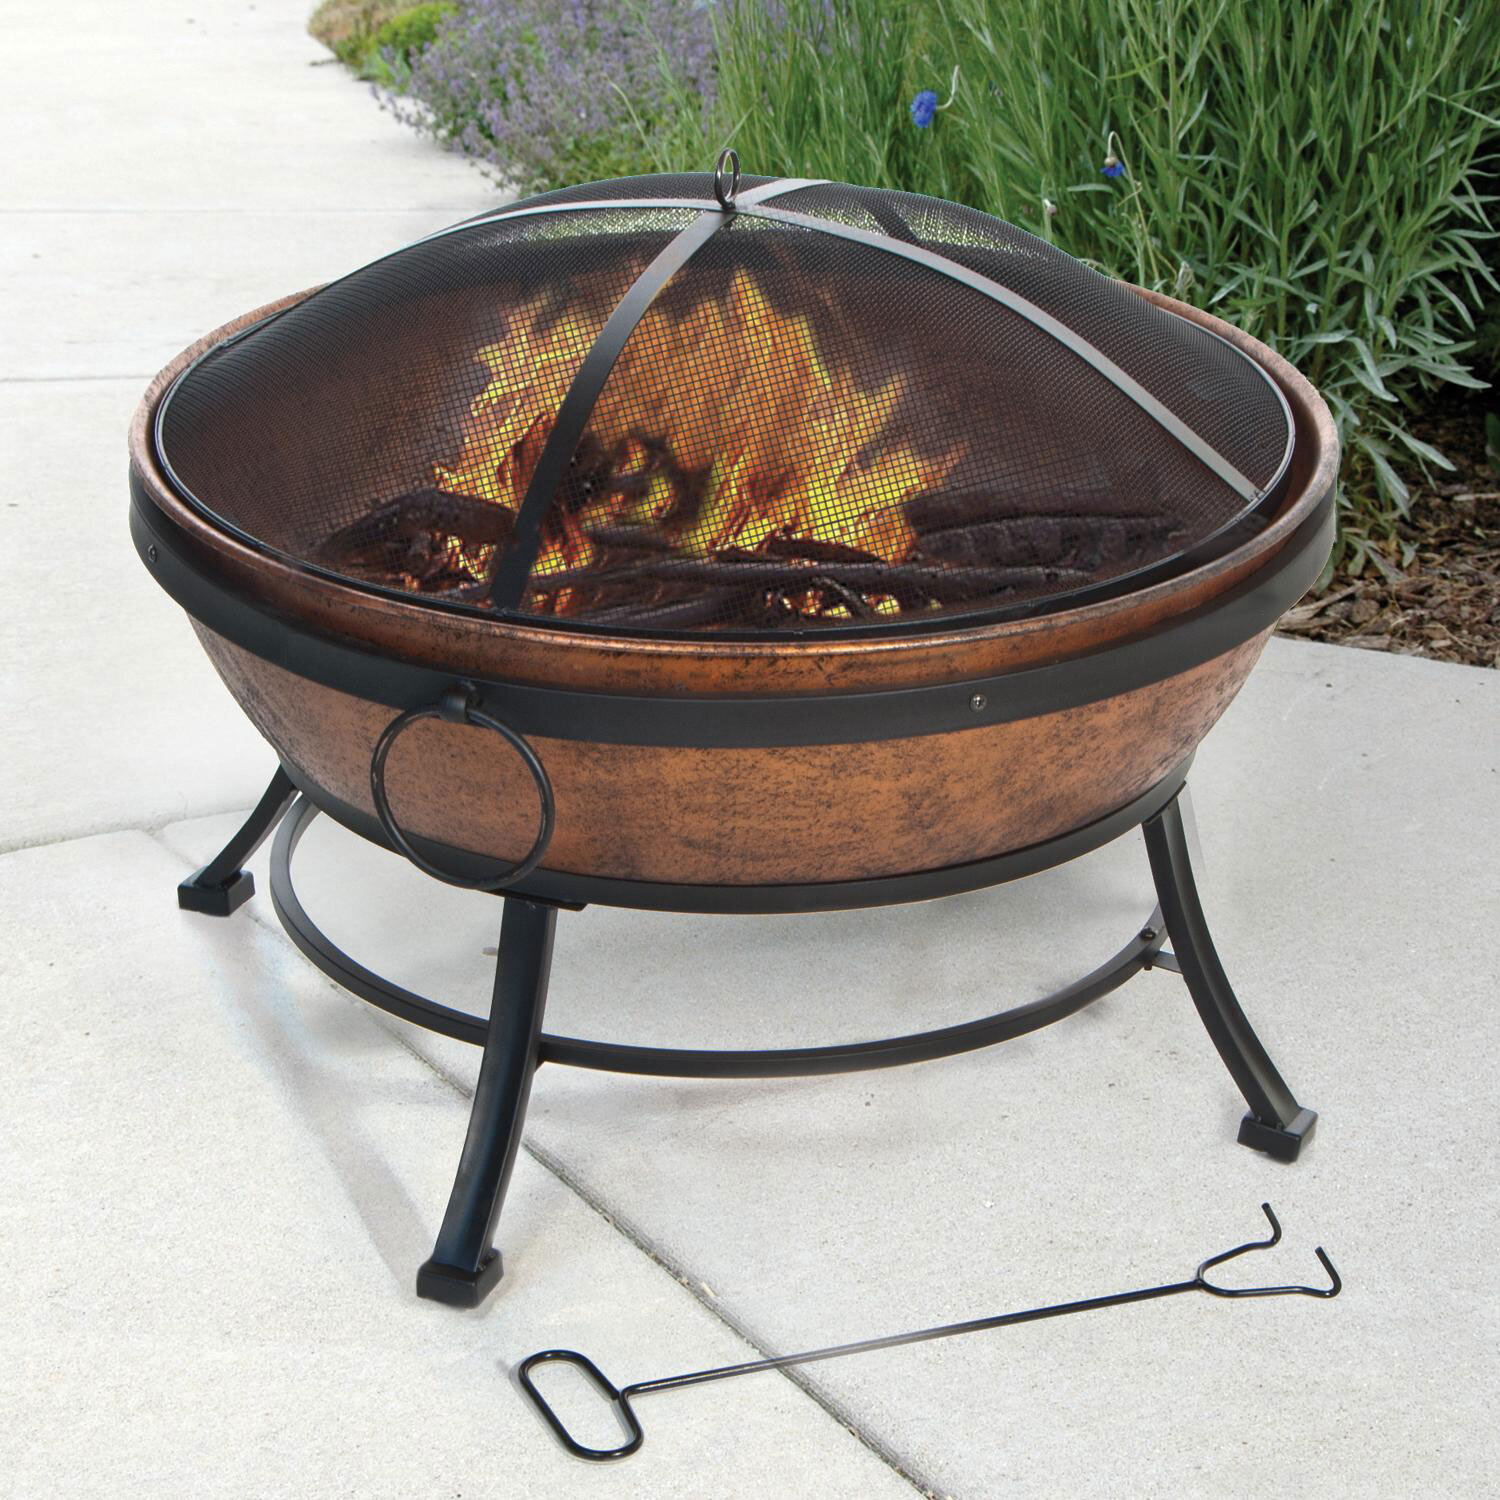 Round Wood-Burning Fire Bowl for Outdoor Use with Spark Screen and  Accessories - China Portable Fire Pit, Portable Fire Pit Stand